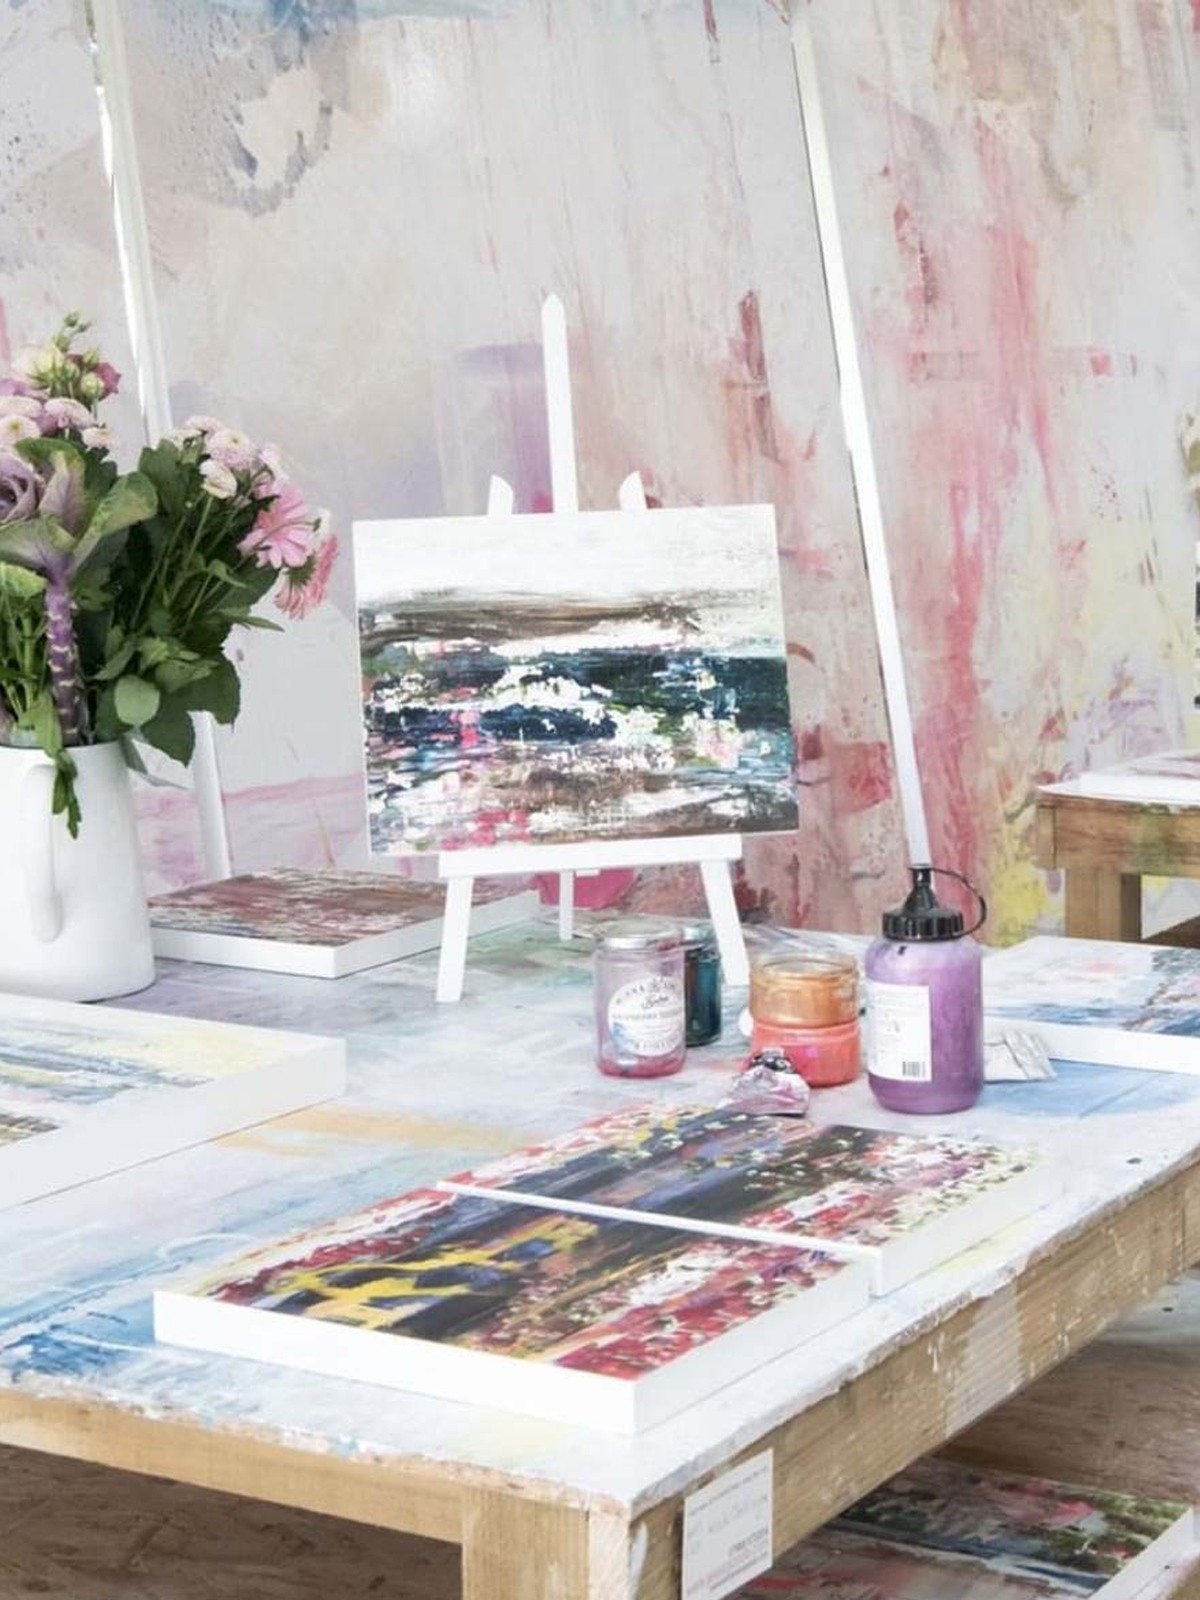 ‘Painting for joy’ with Jessica Zoob